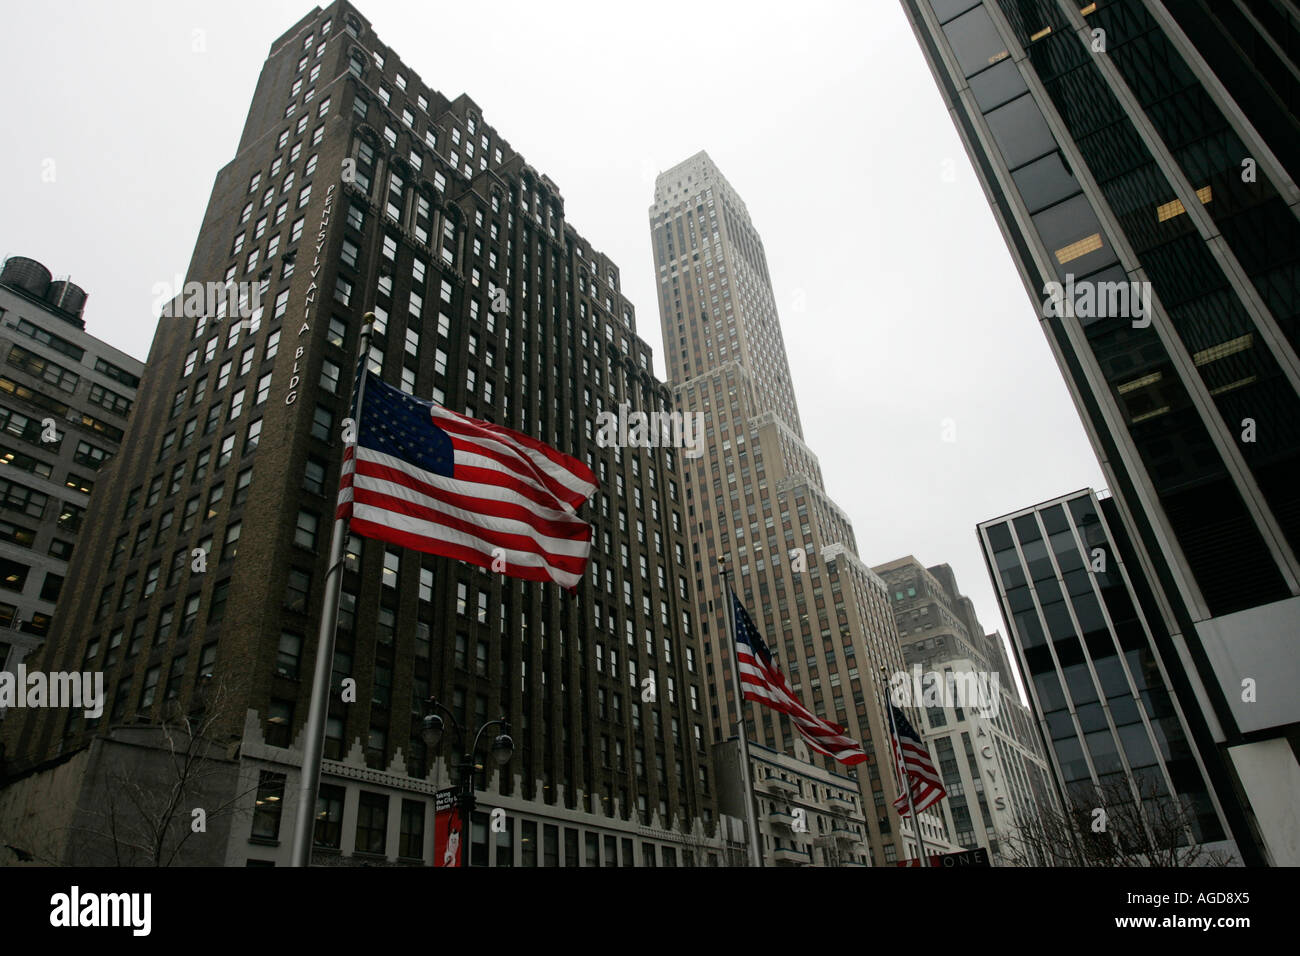 view of pennsylvania bldg nelson tower and US flags flying on 34th street from 1 penn plaza new york city new york USA Stock Photo